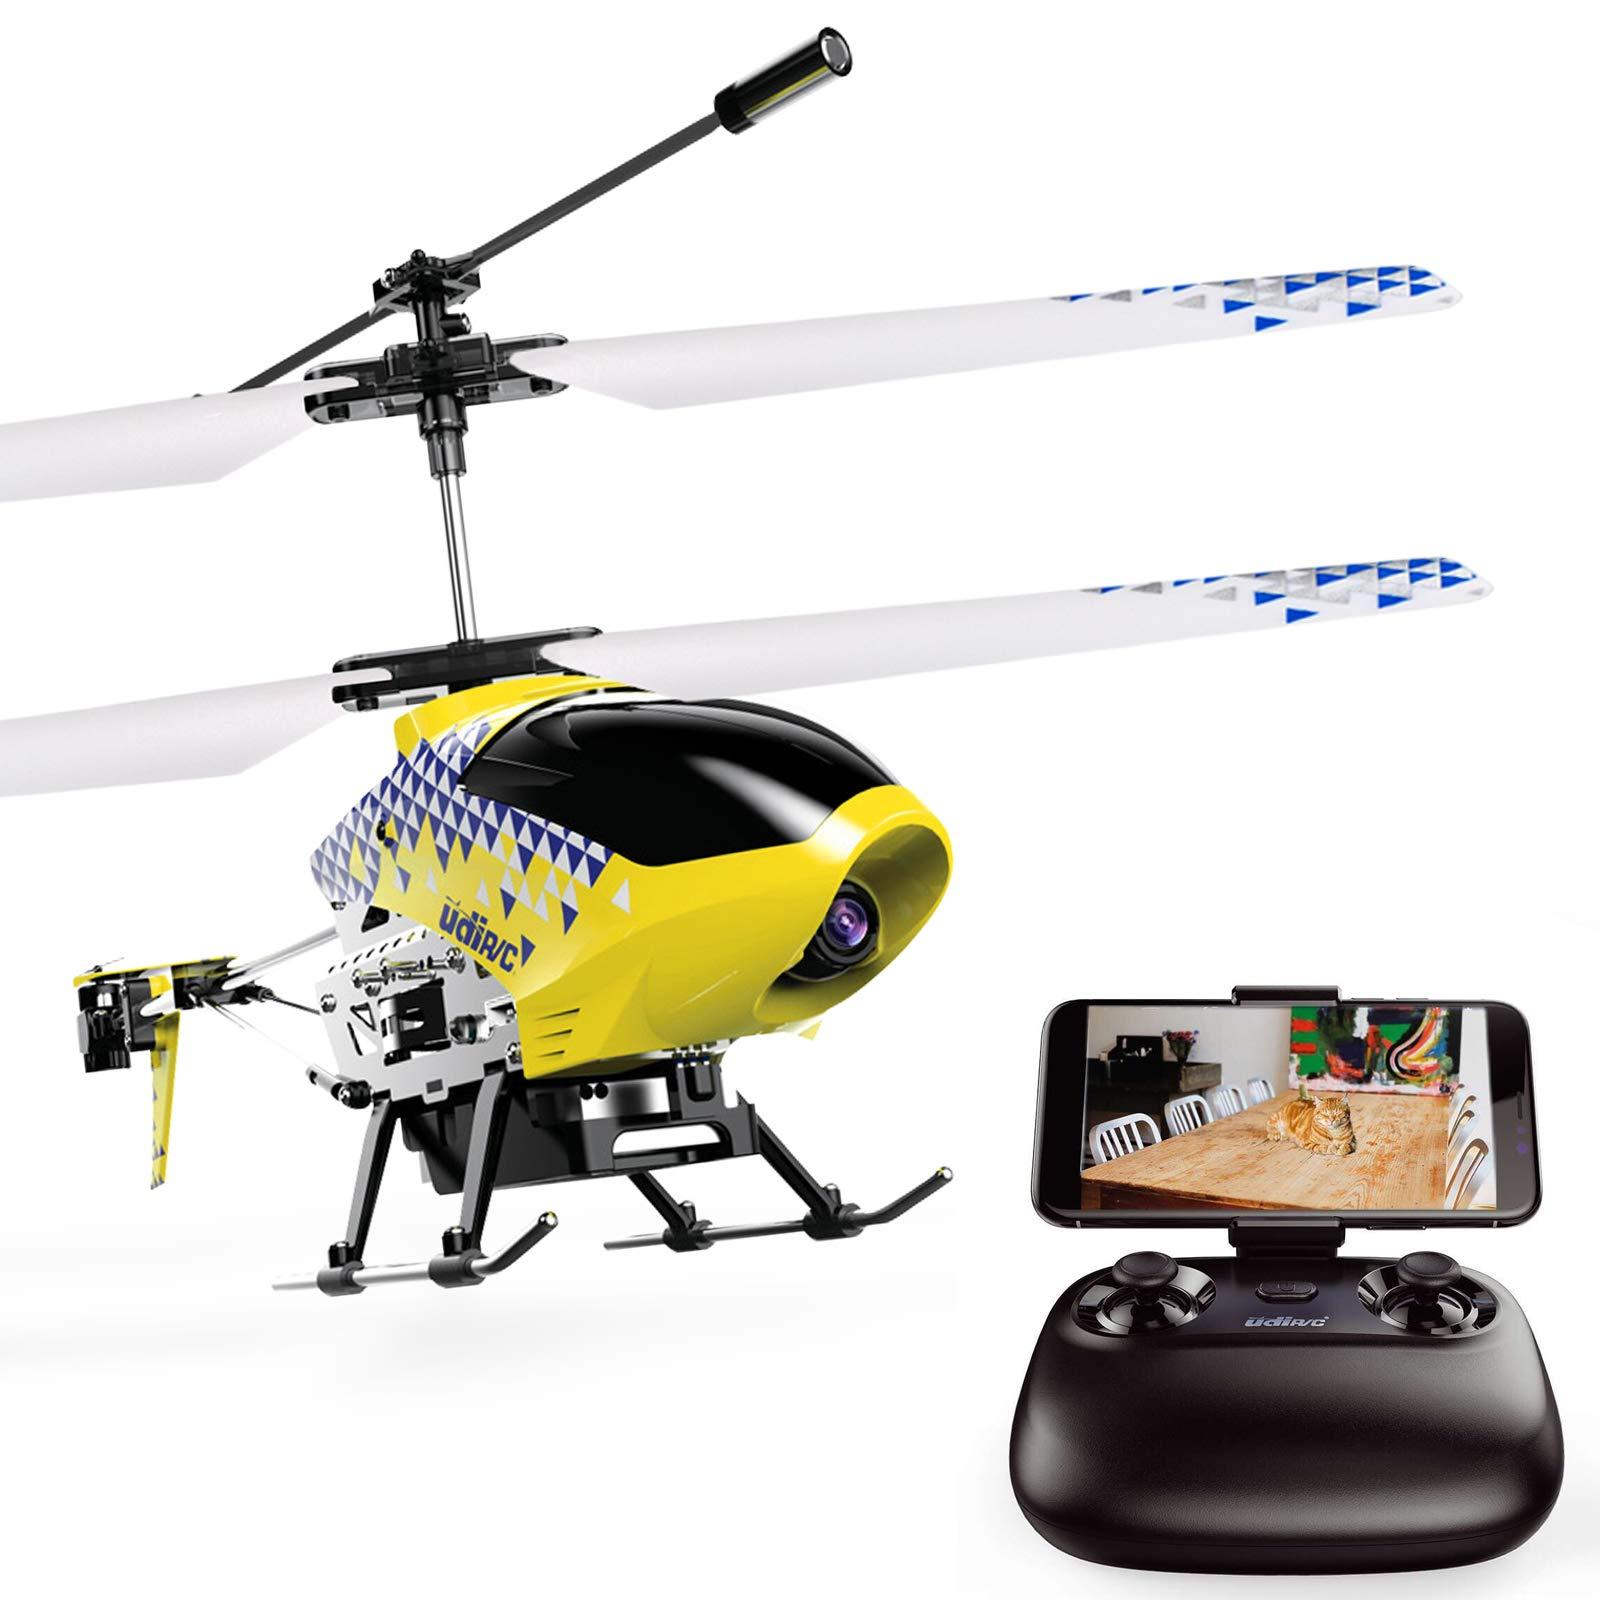 Rc Metal Helicopter: Benefits of an RC Metal Helicopter